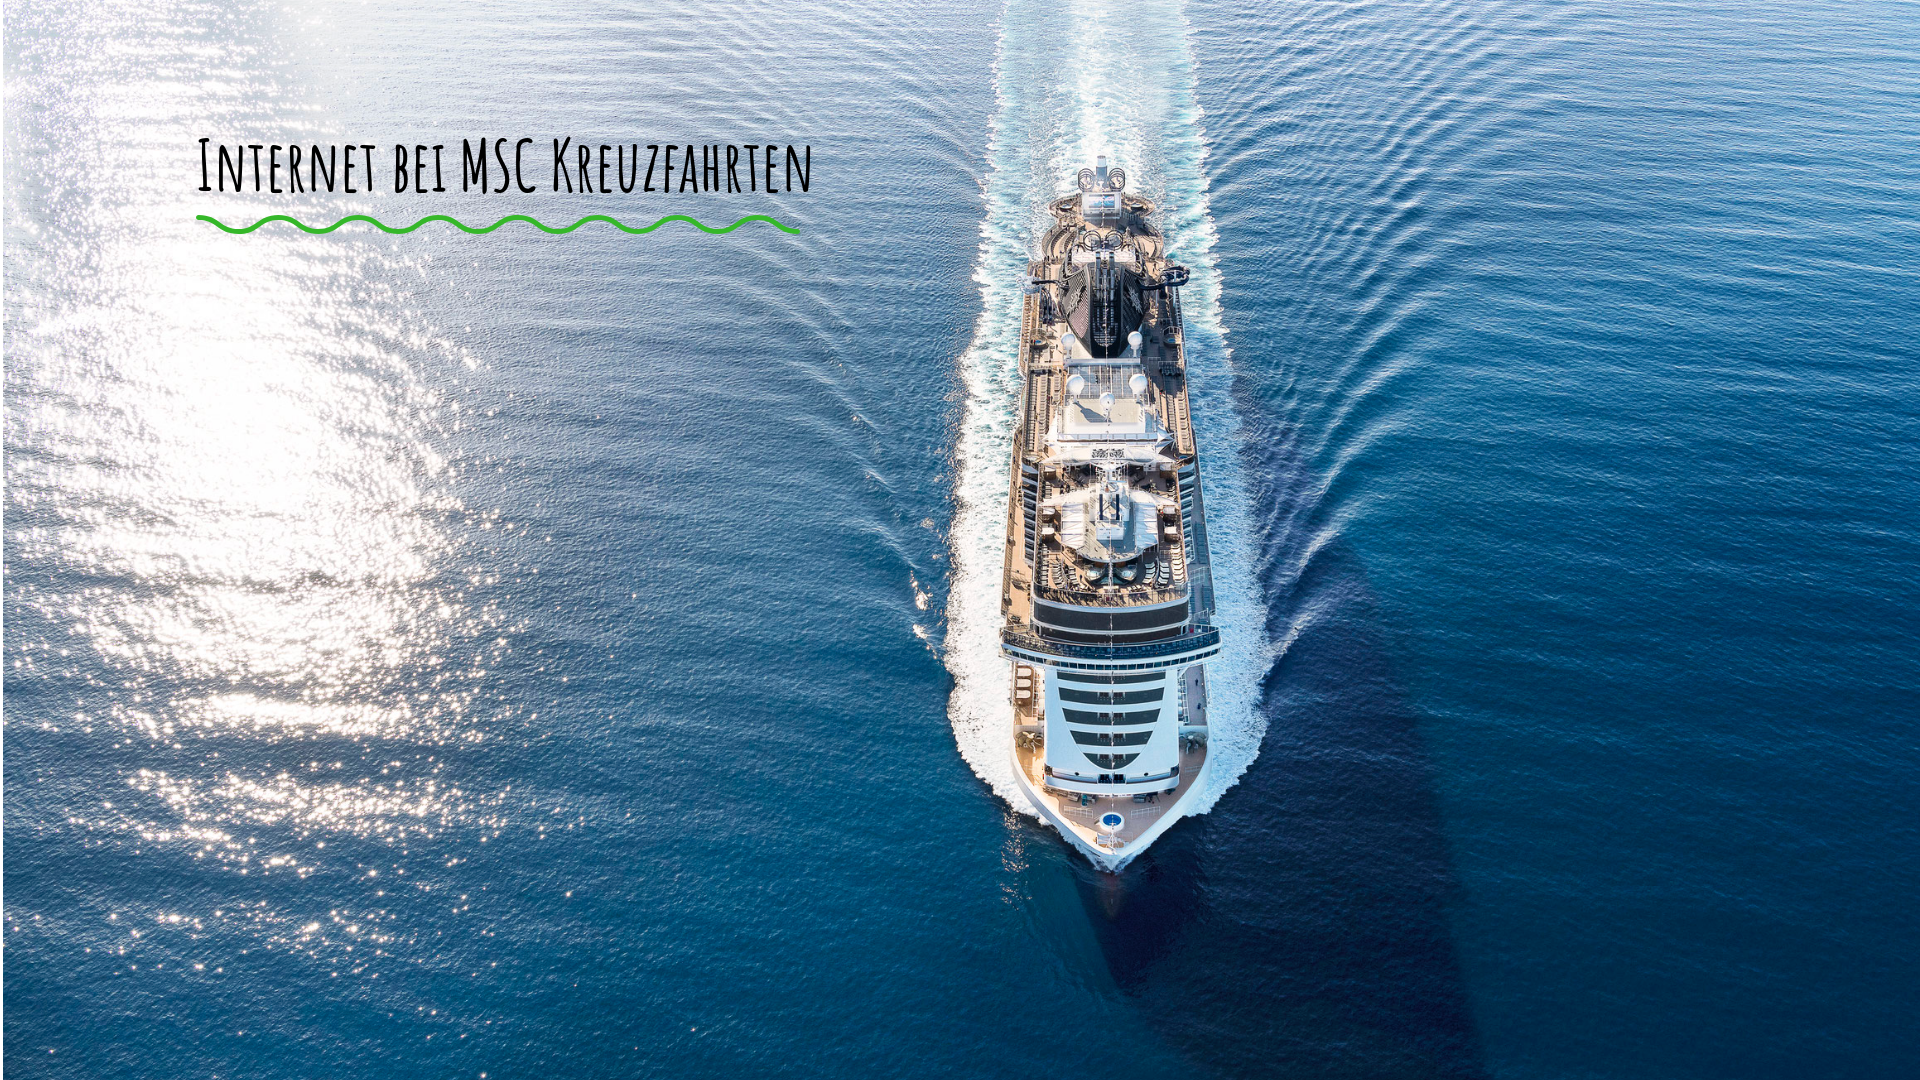 msc cruises internet package prices